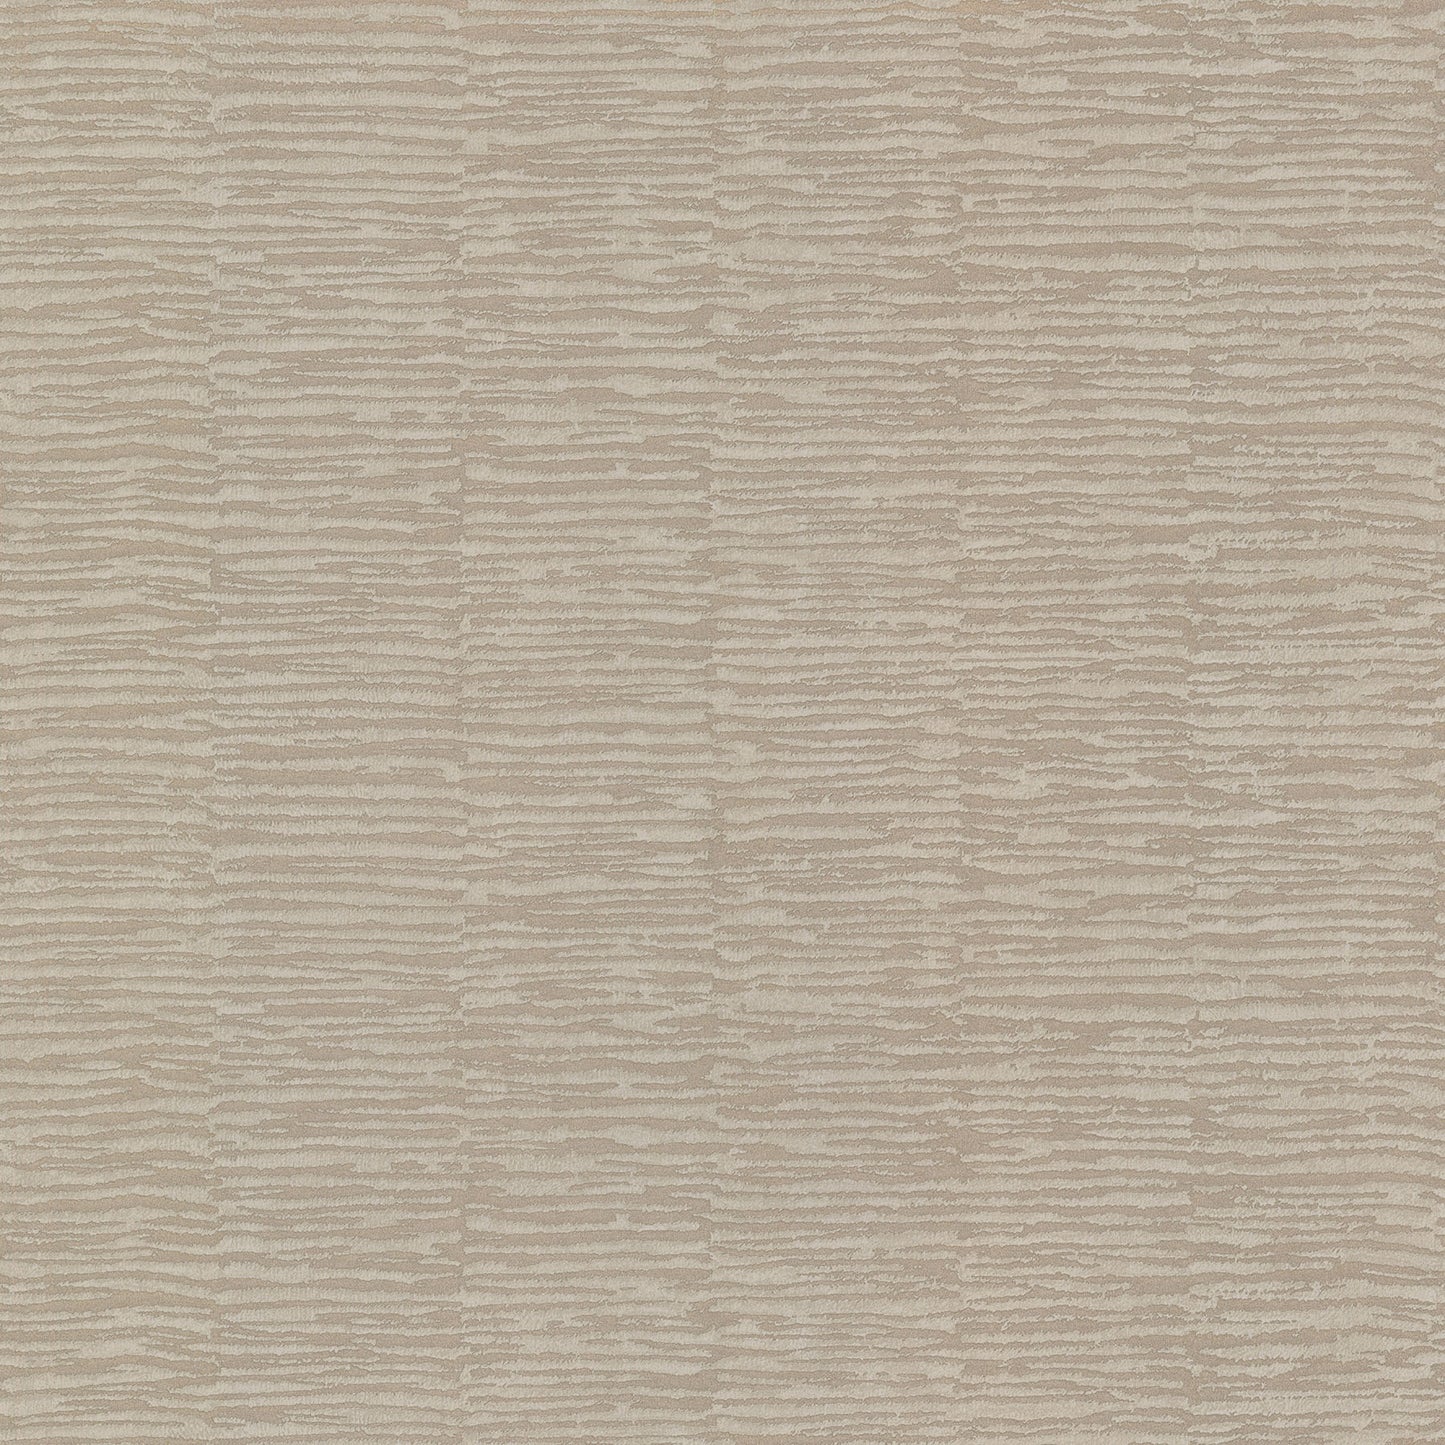 Shop 2767-24453 Goodwin Gold Bark Texture Techniques & Finishes III Brewster